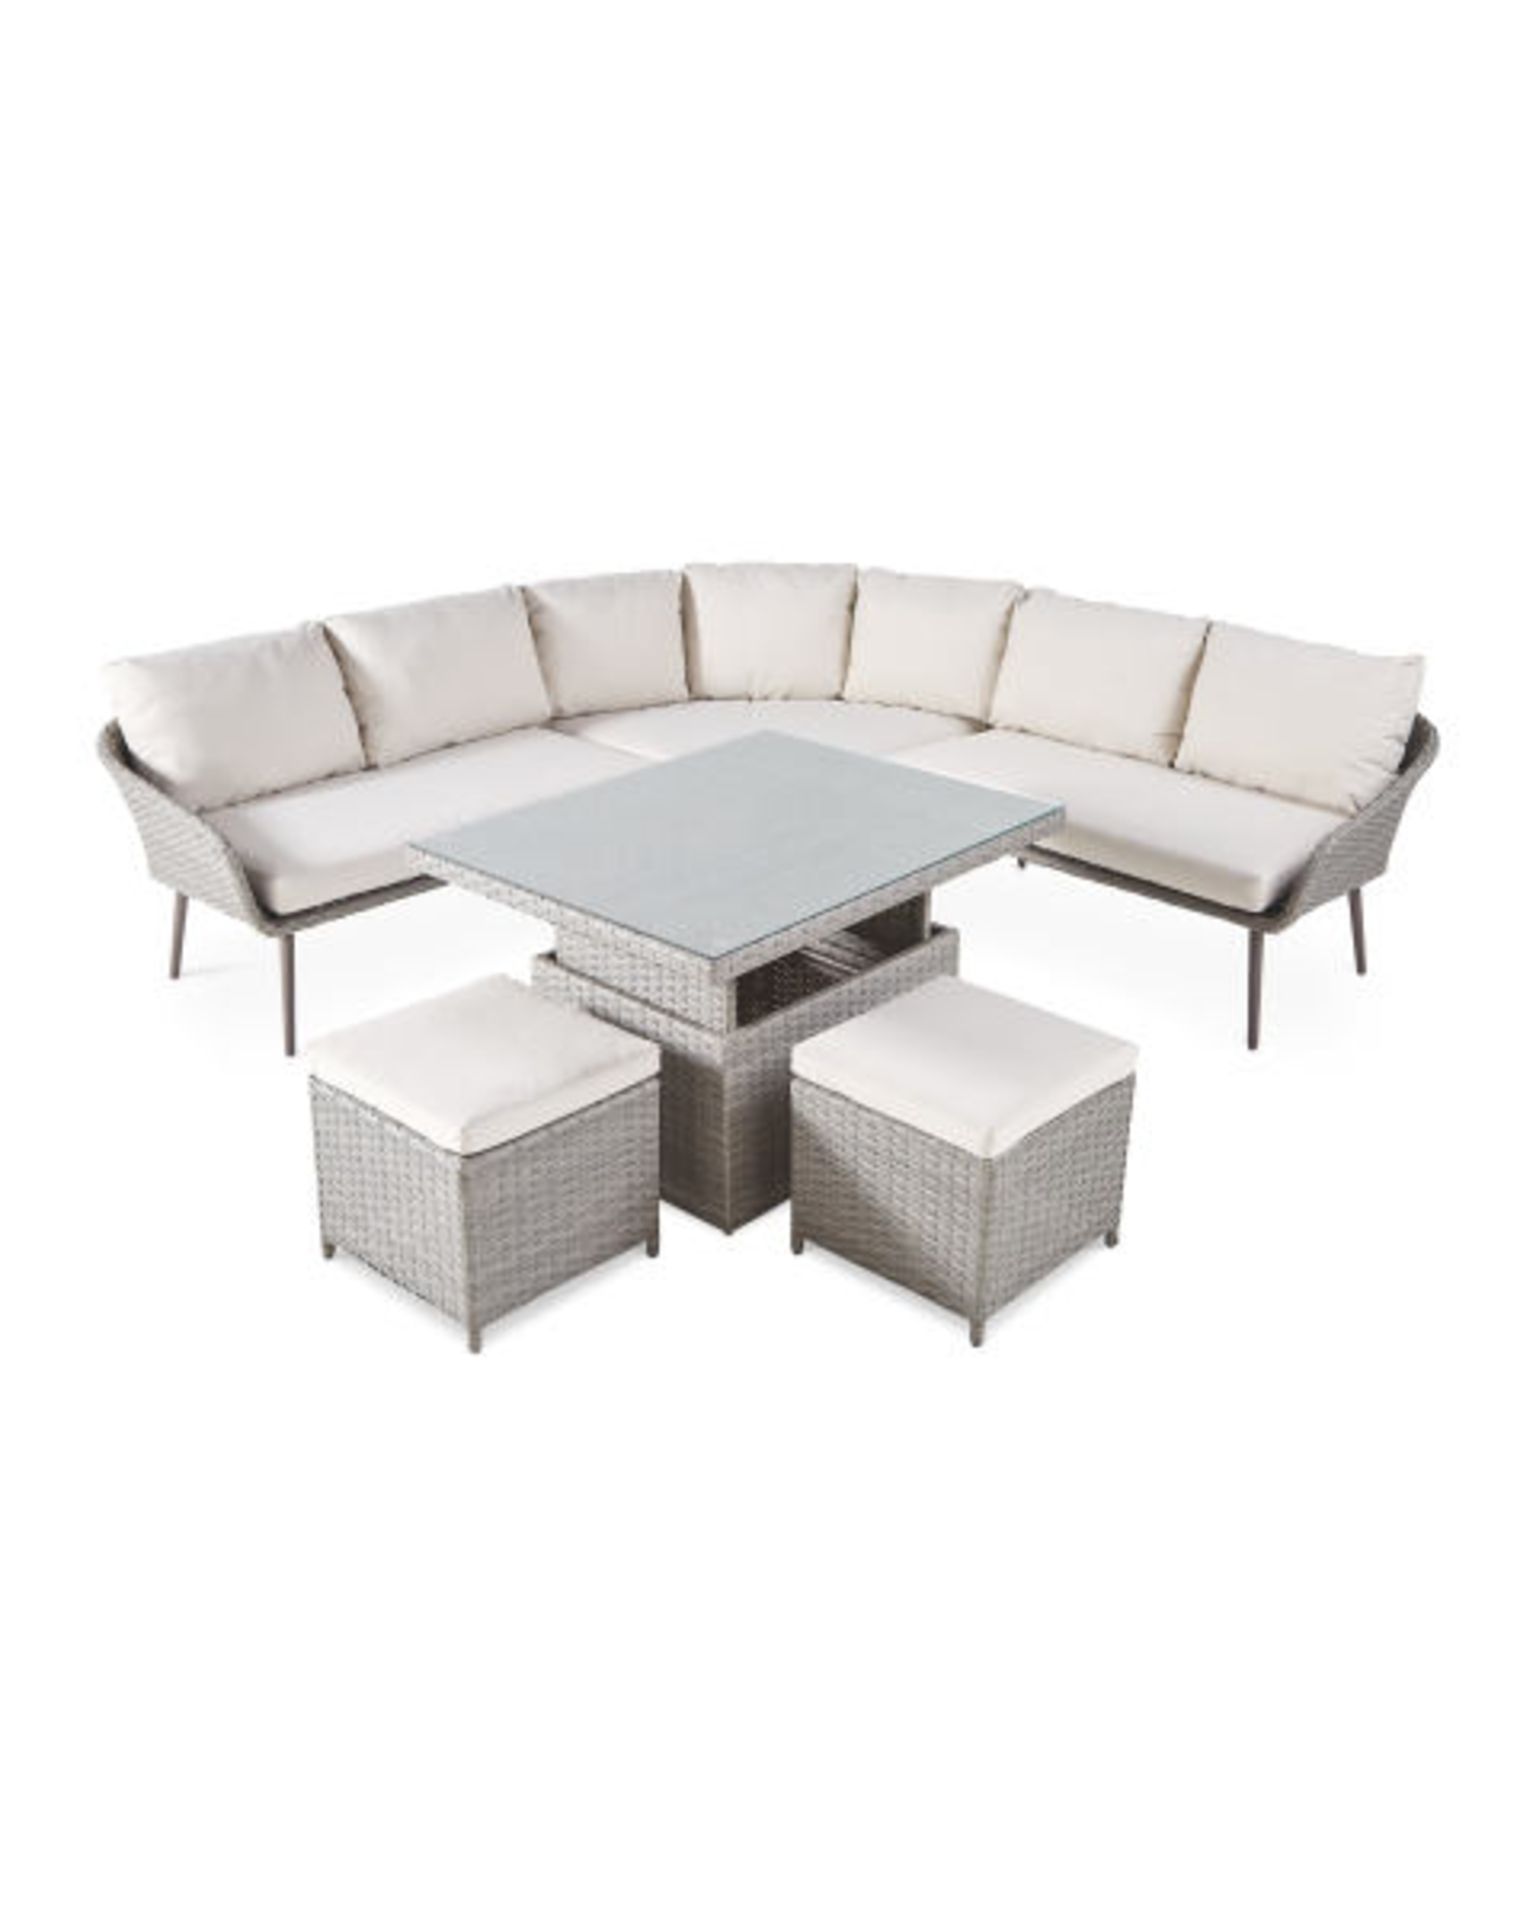 Multifunctional Lounge & Dining Corner Sofa Dining Set. Enjoy the warmer weather with this Luxury - Image 2 of 5